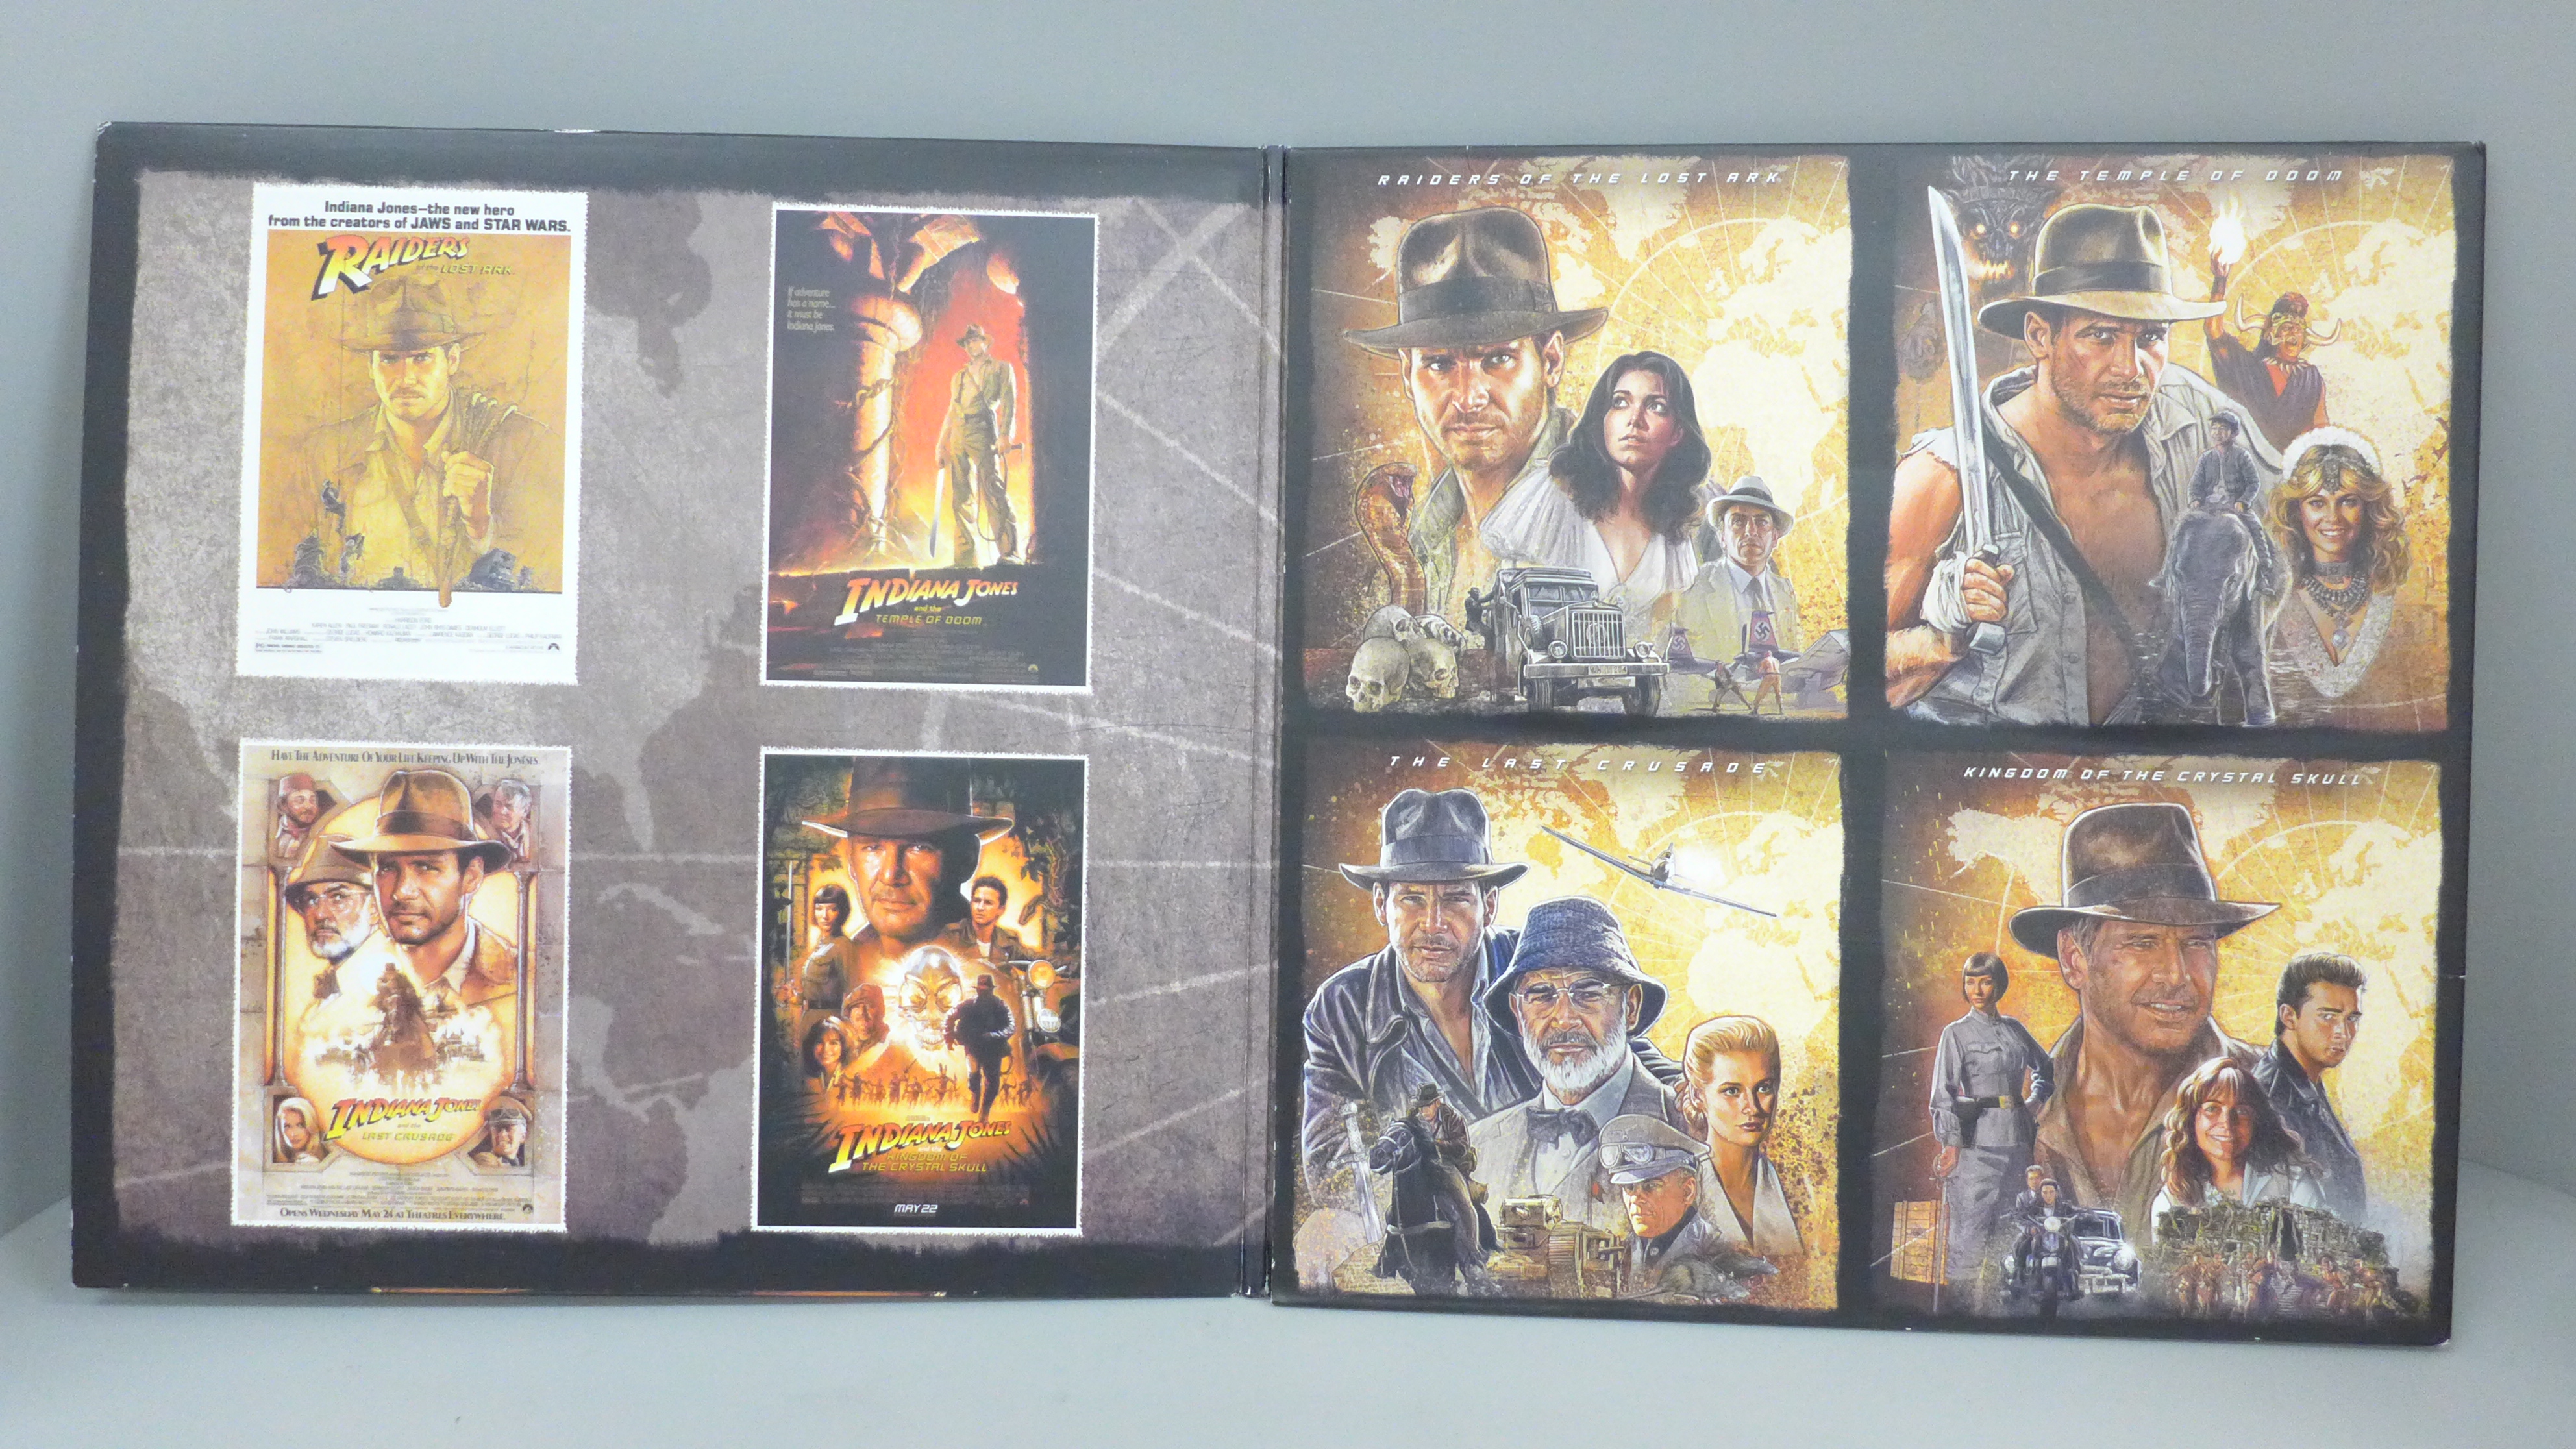 Indiana Jones, The Complete Adventures, LP record and DVDs with inserts - Image 2 of 4